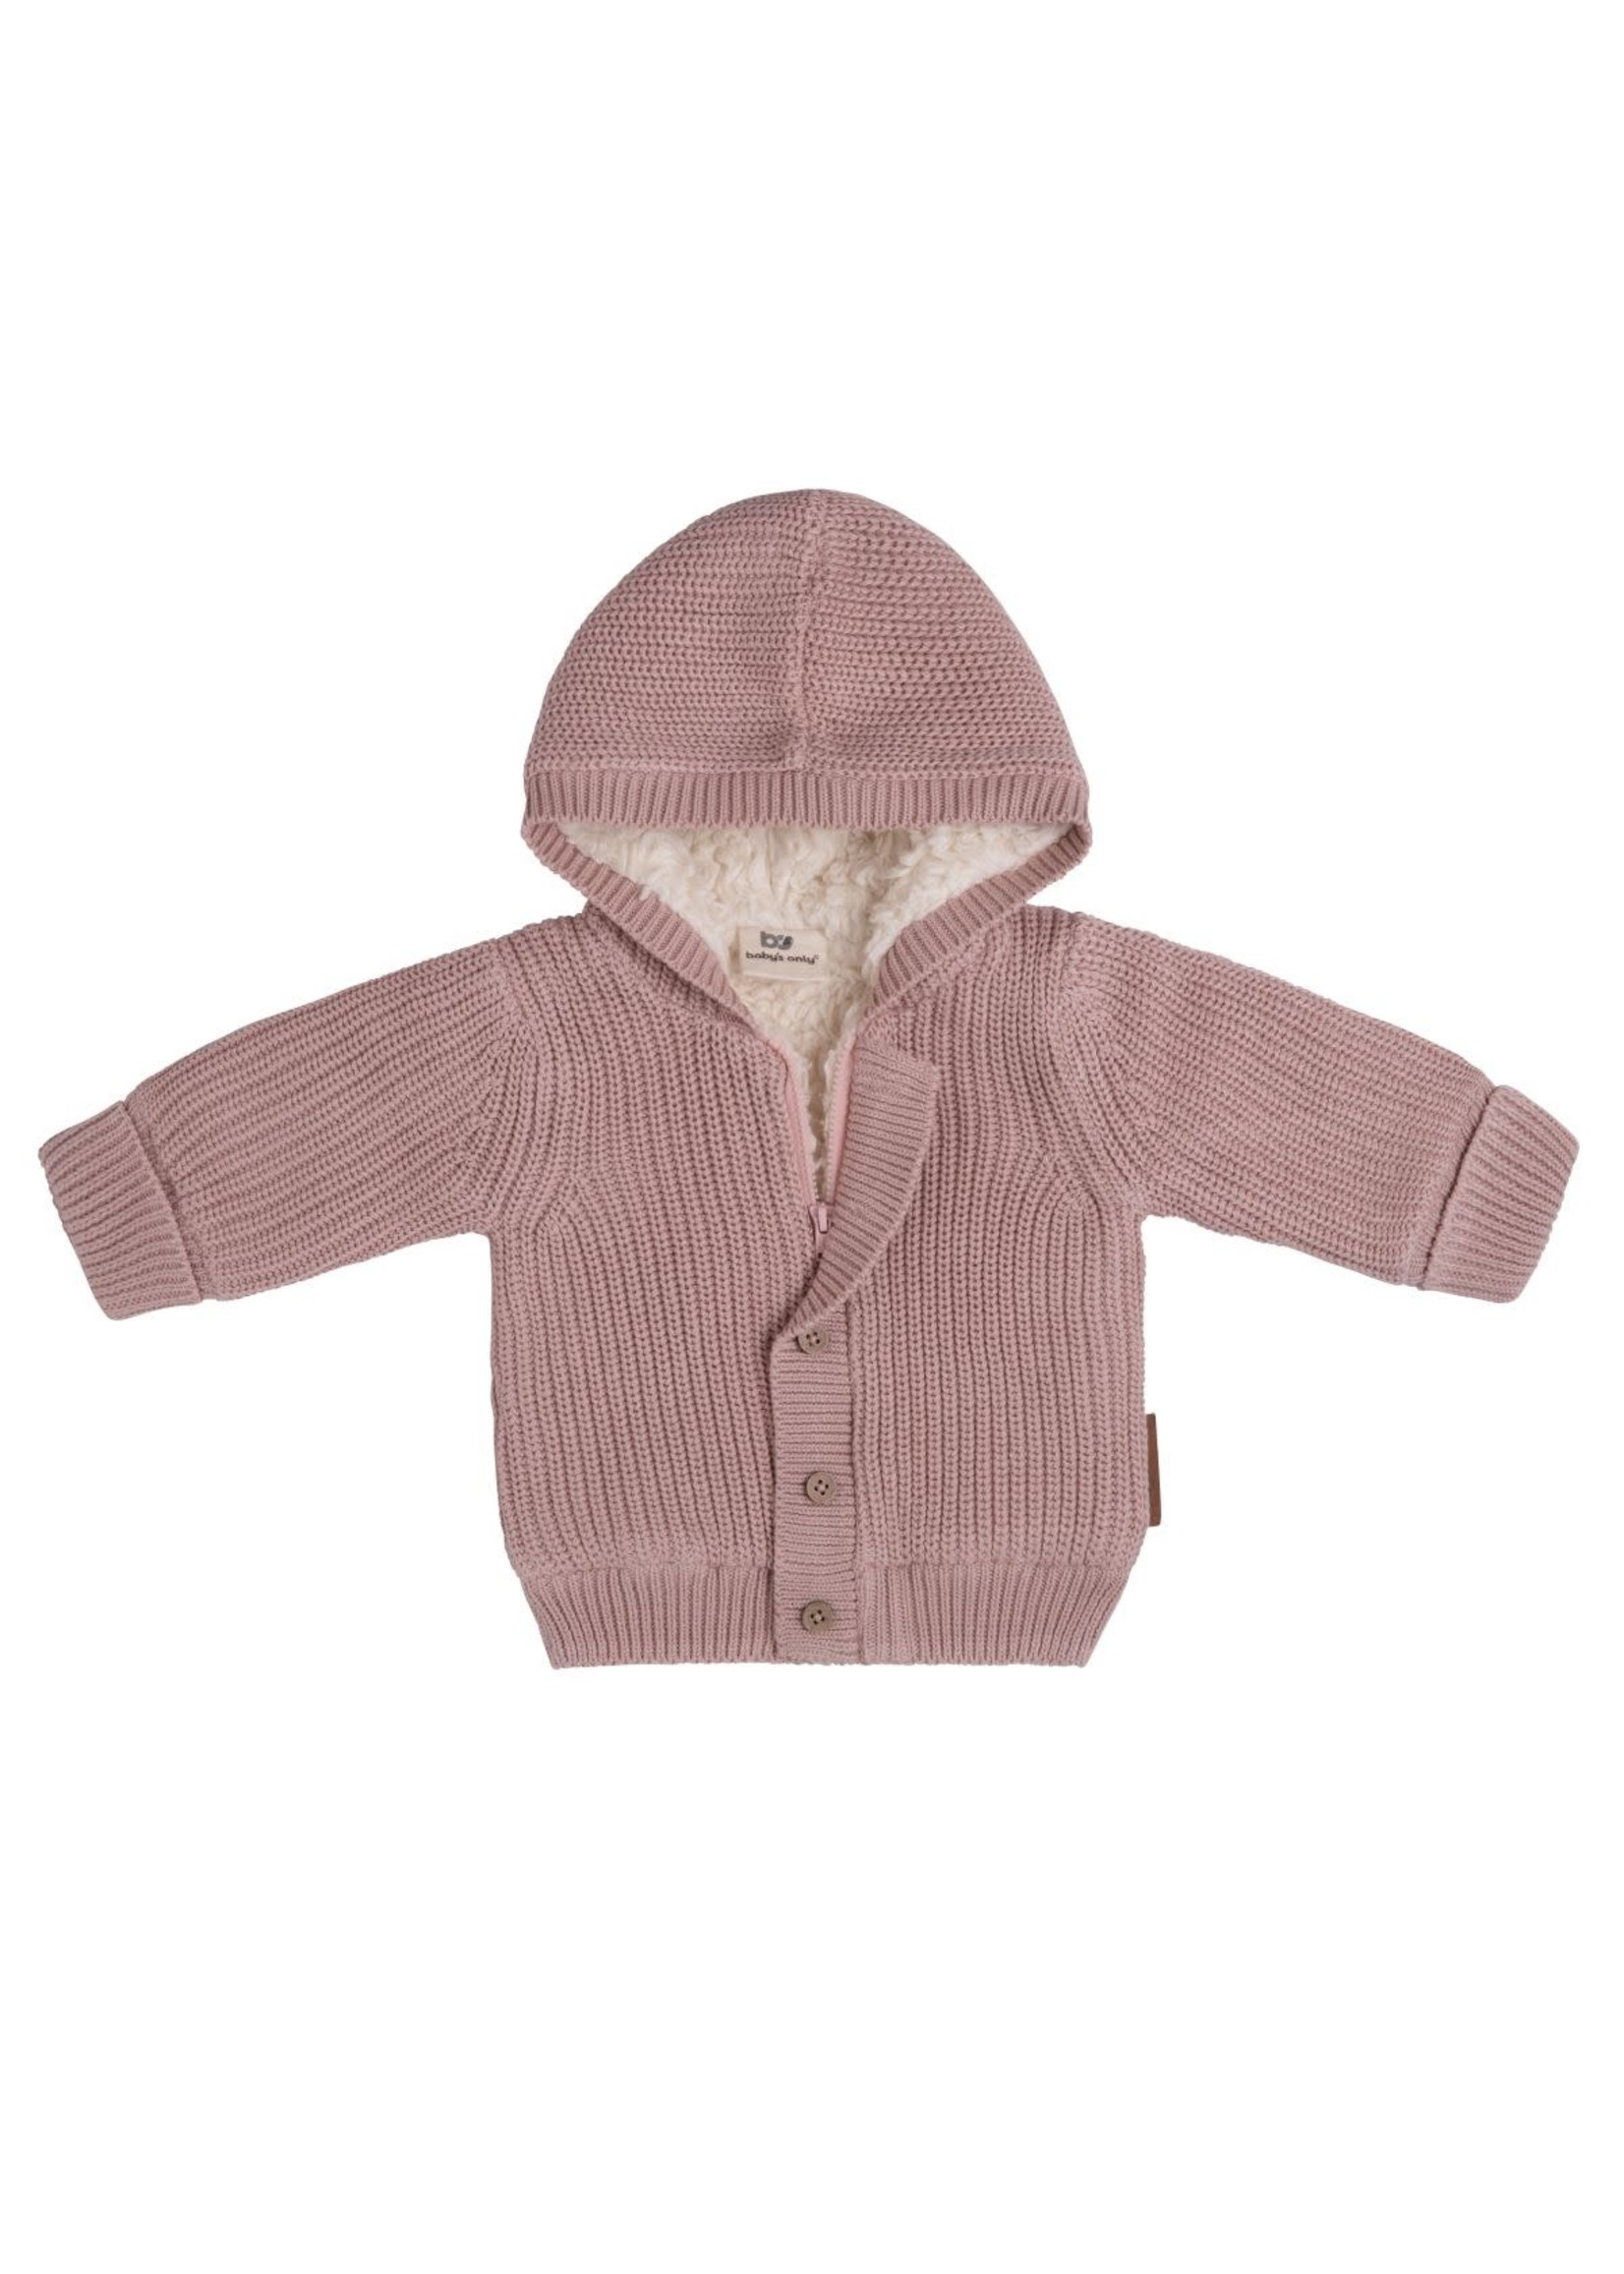 Baby's Only Baby's Only Soul Oudroze Vestje Teddy met capuchon